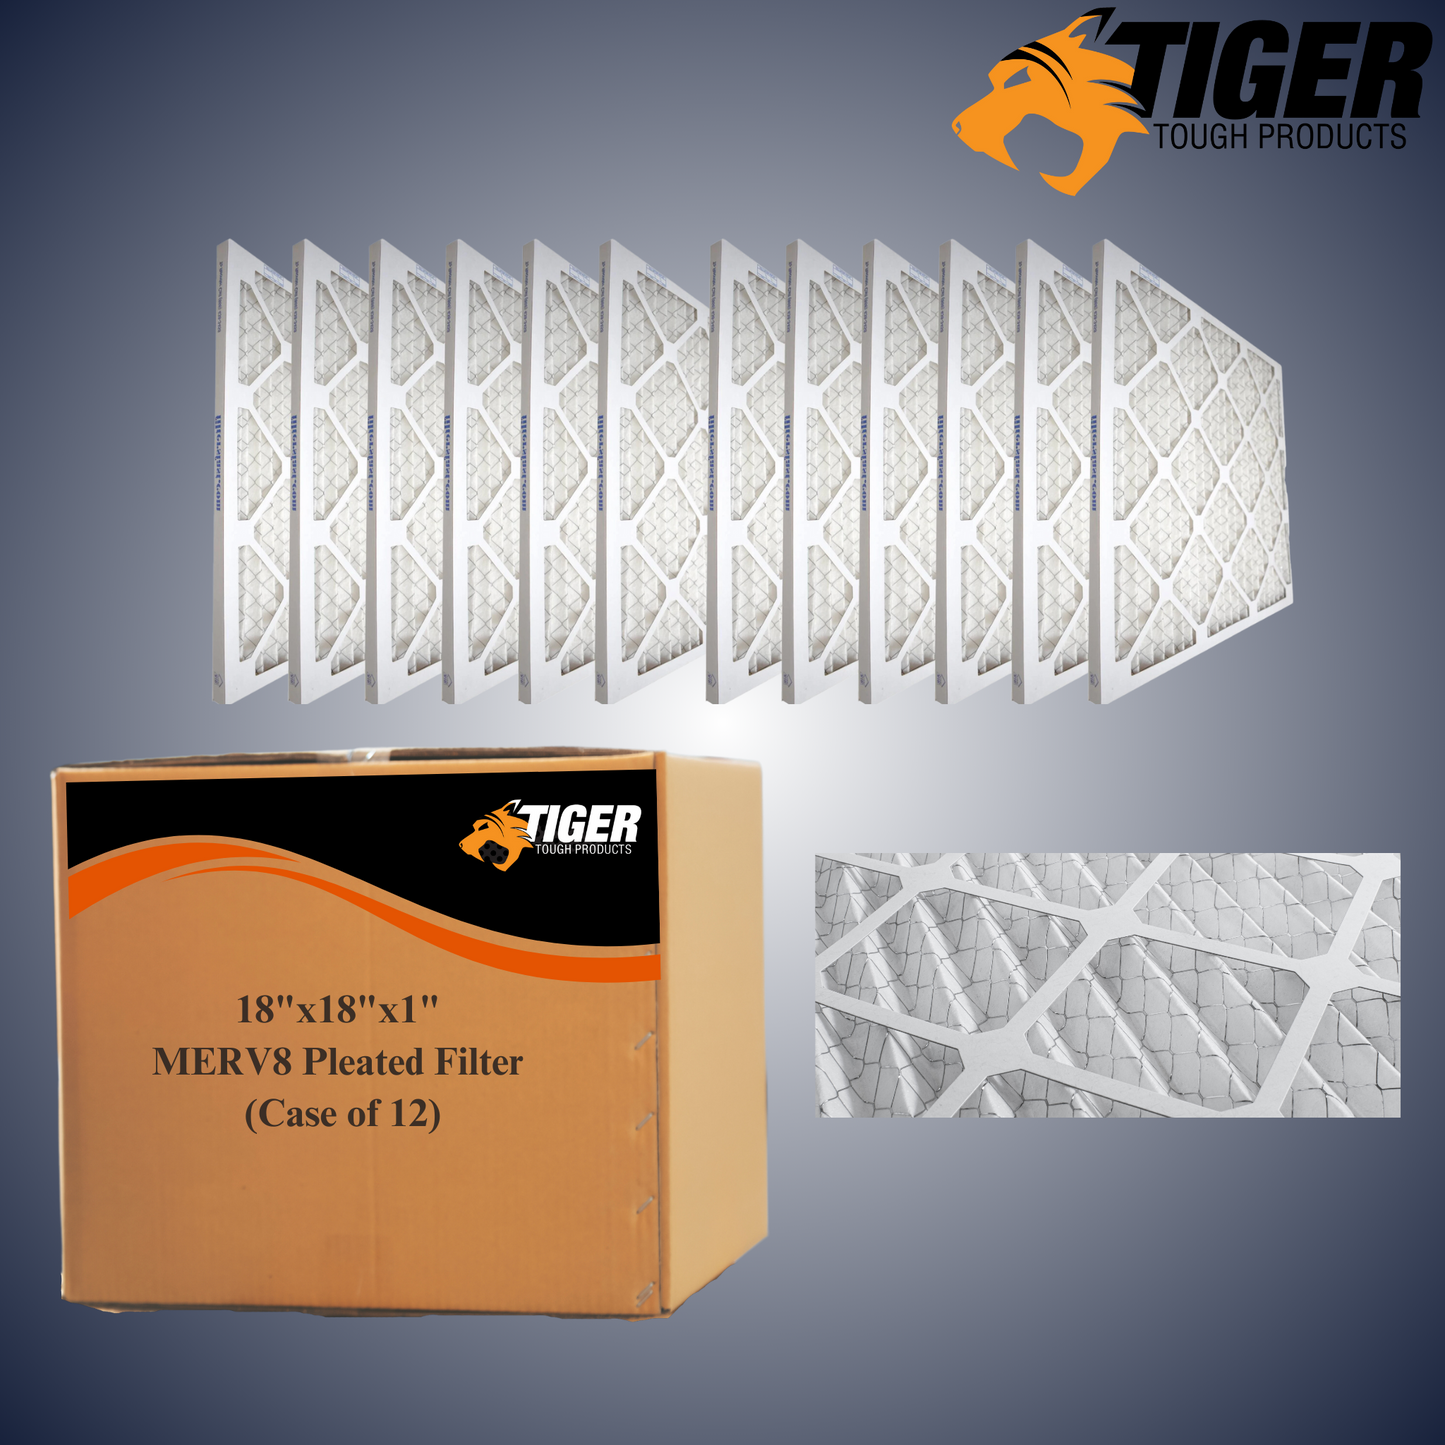 MERV 8 Pleated Filter 18x18x1 in (12 Pack) Misc